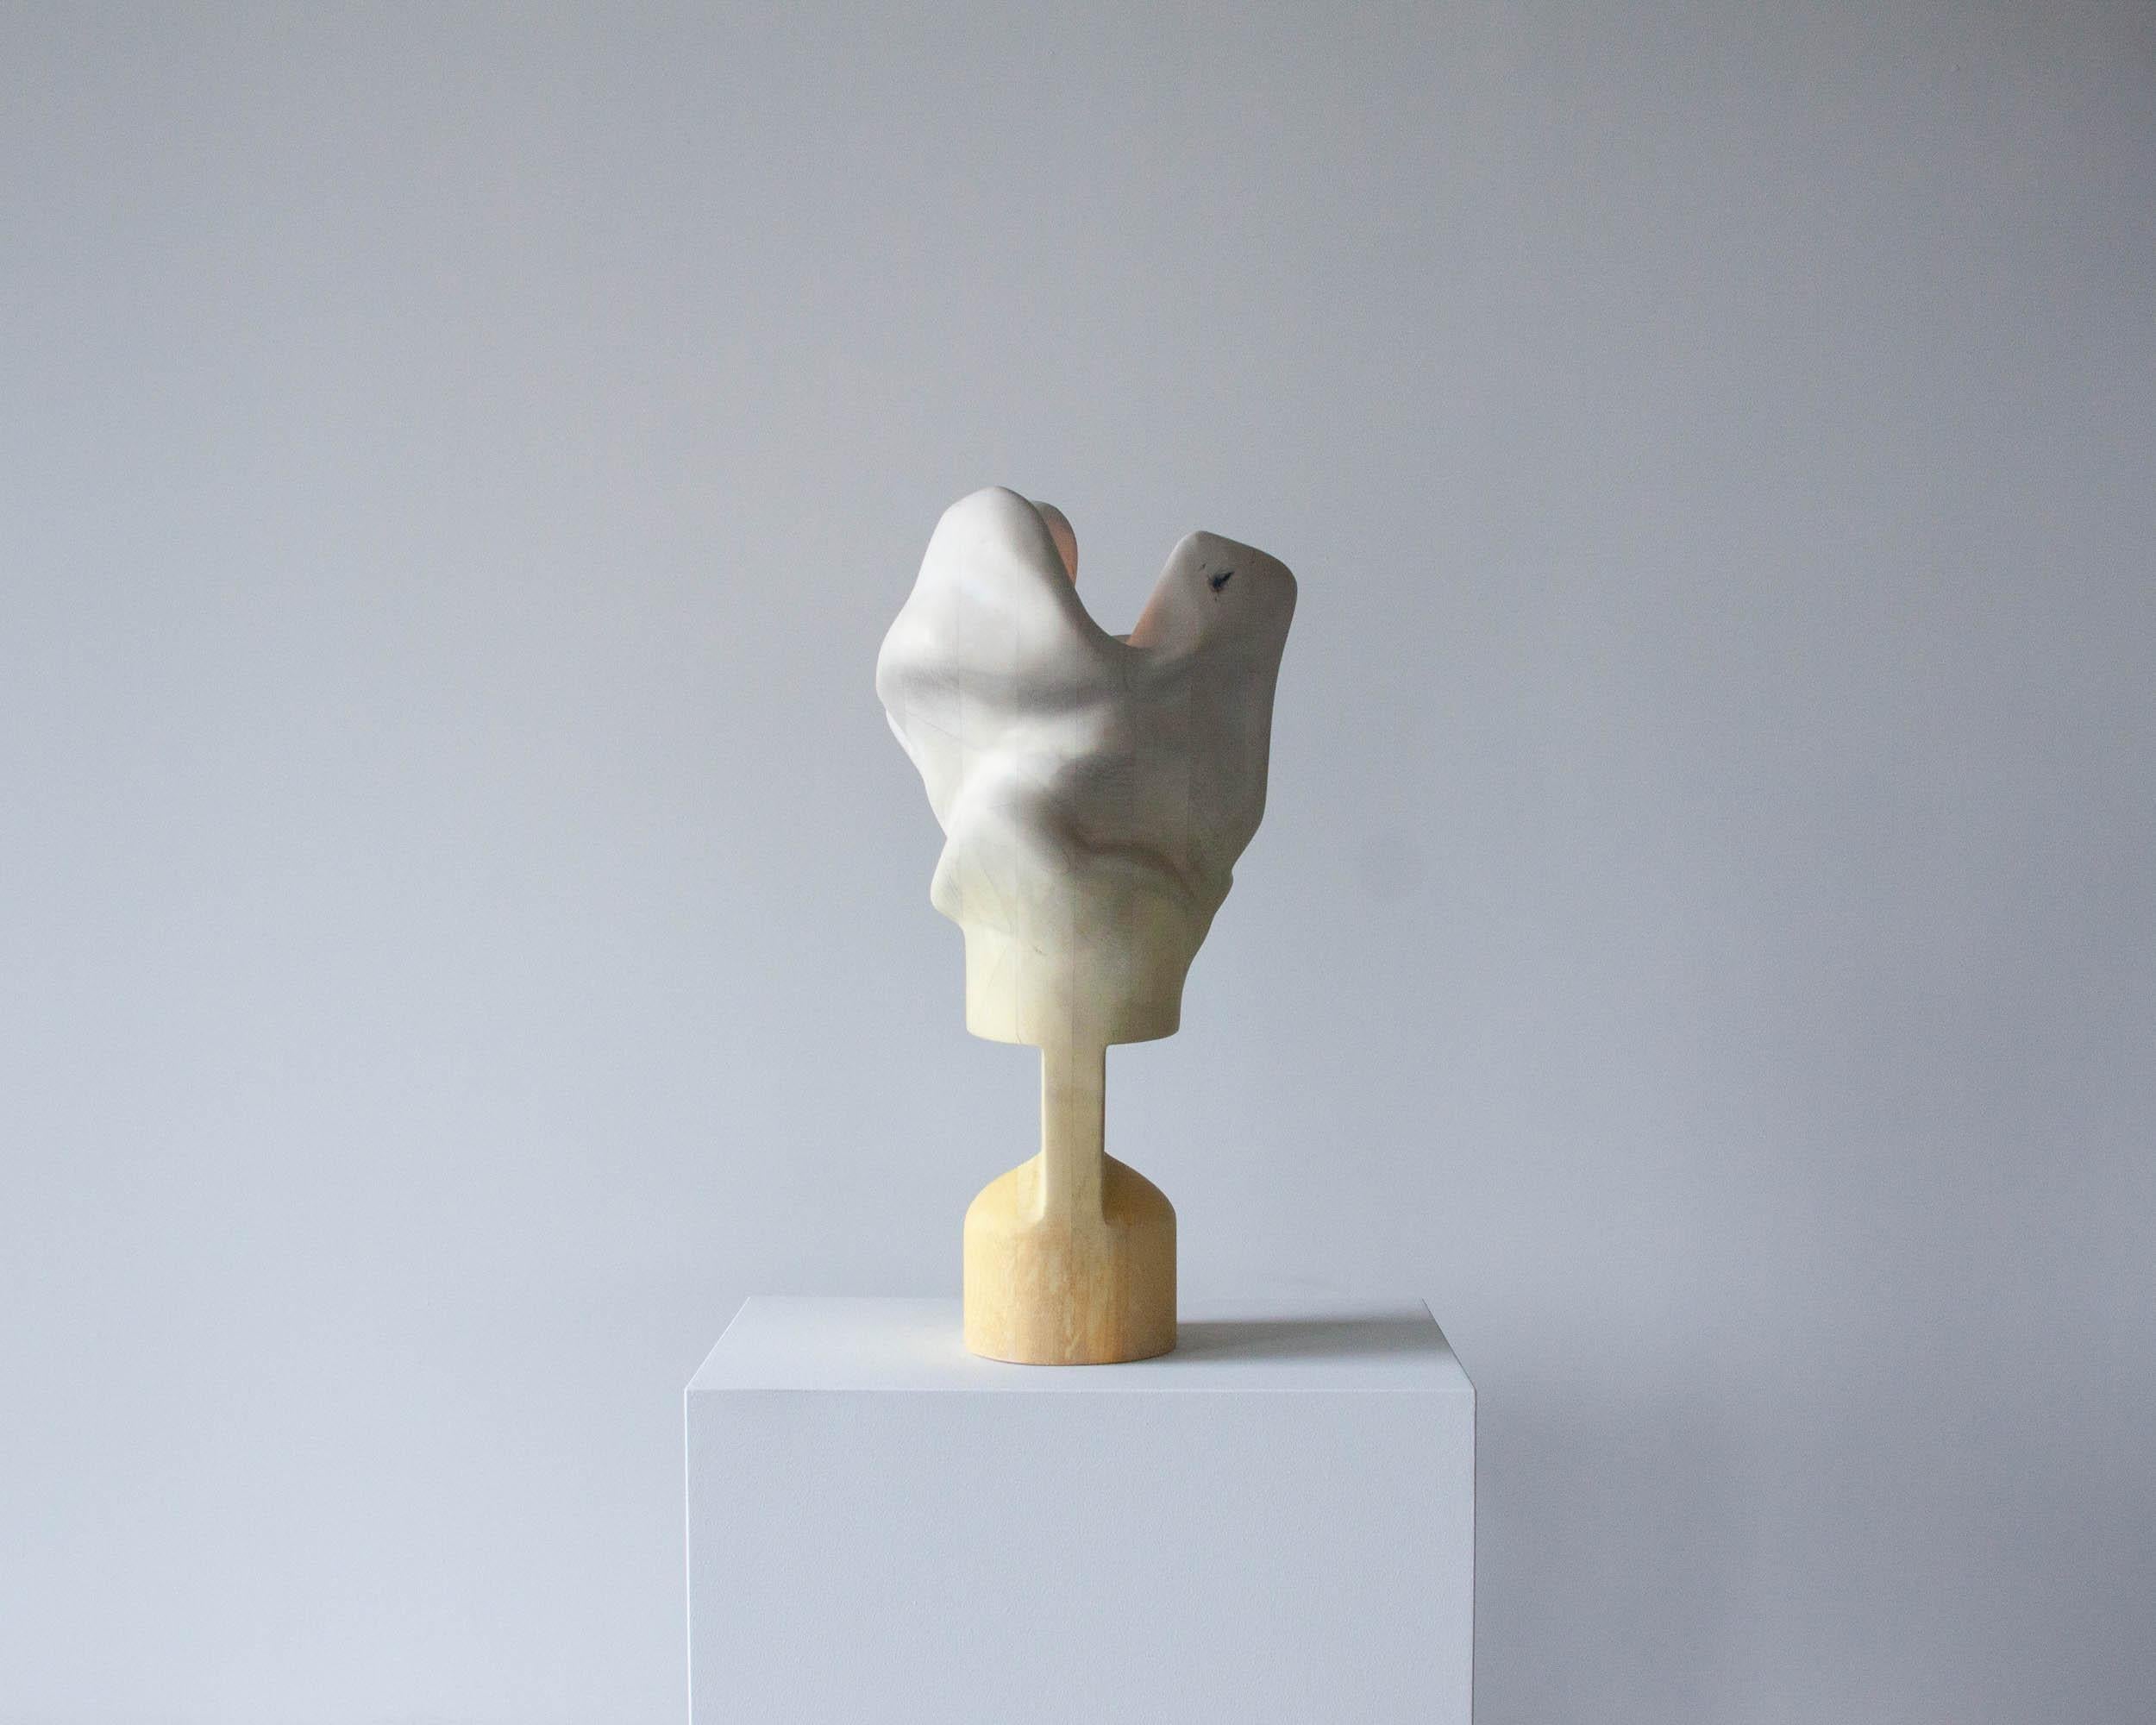 Vincent Pocsik’s sculptural works are a study of human form abstracted down to the point of its most transformative power. Flesh twists, contracts, pushes against bones and skin and sinew, giving way to transformations of the self and the body that